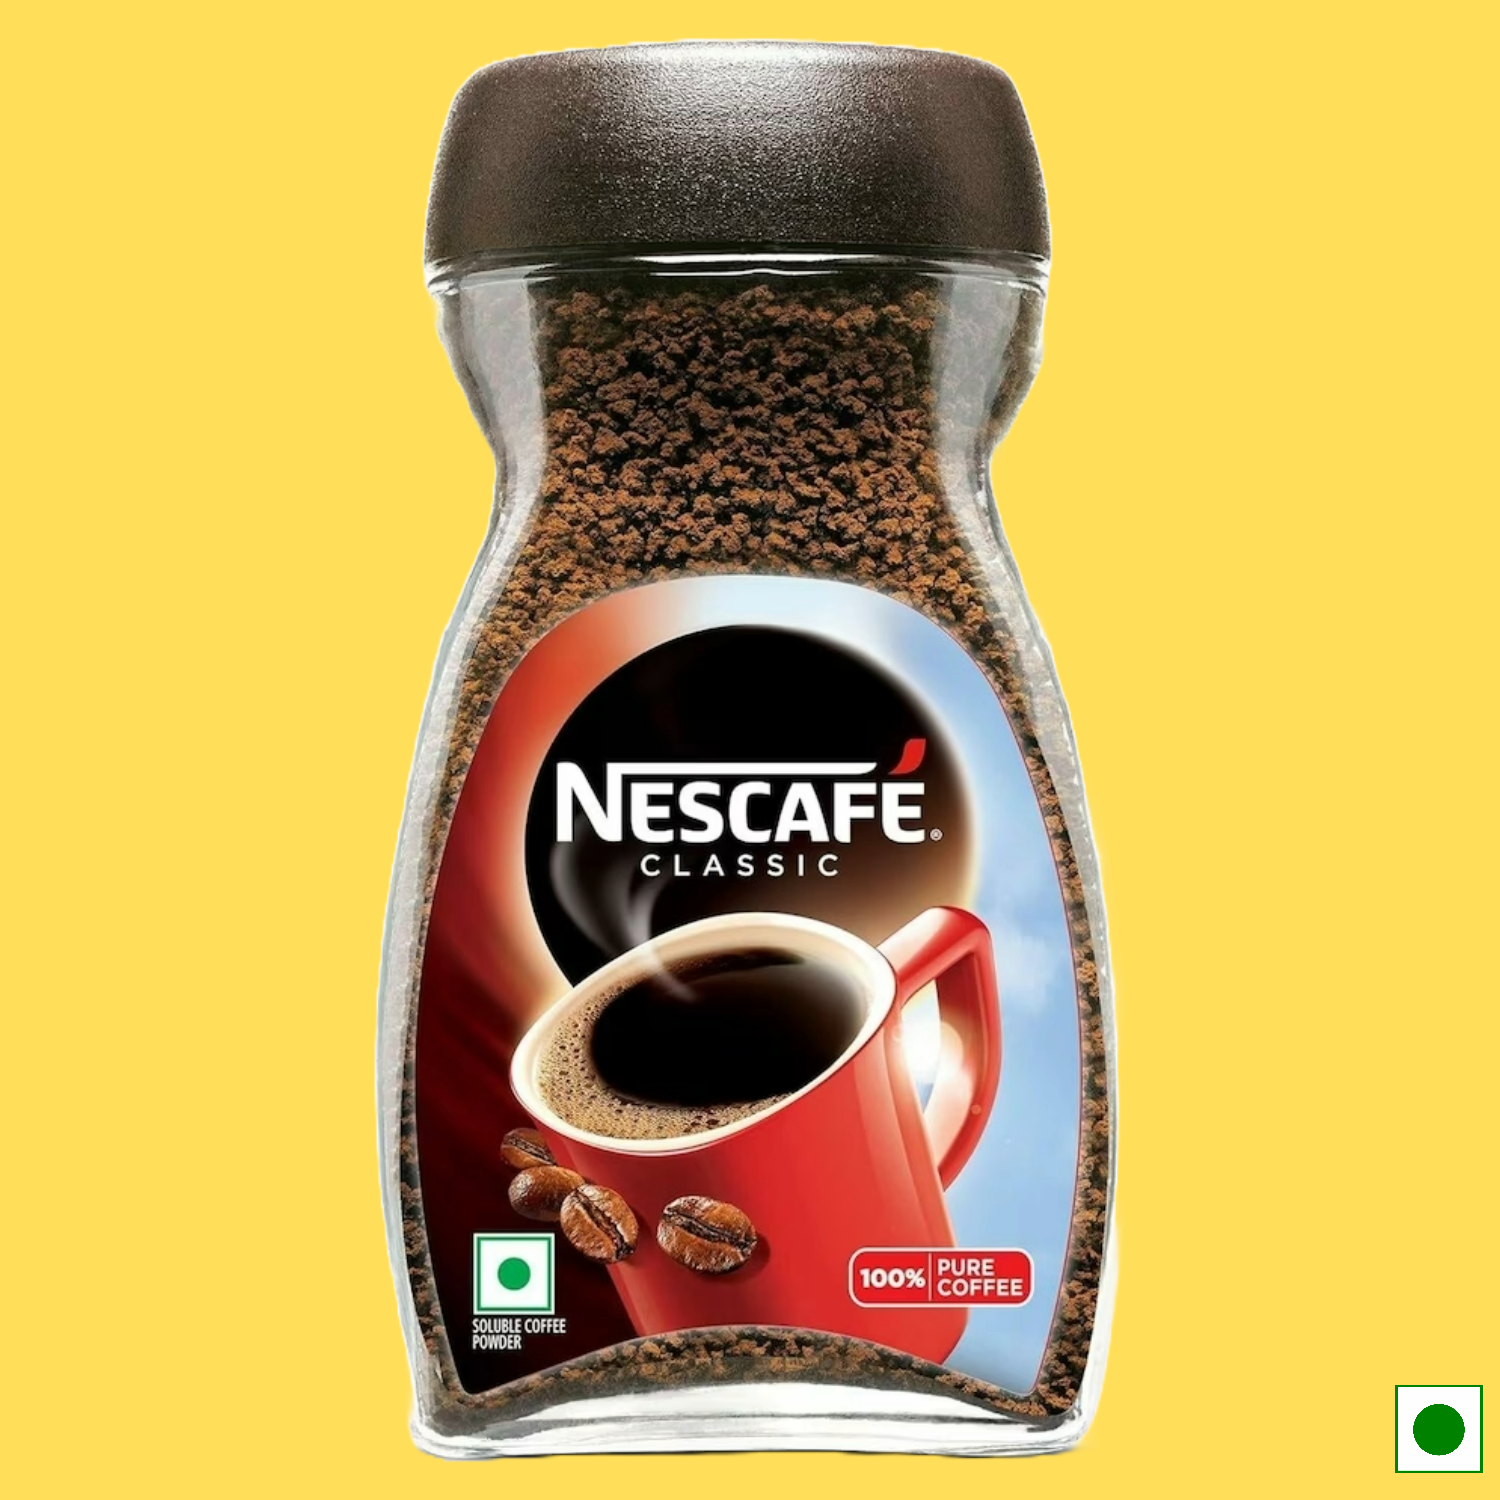 Nescafe Classic Coffee, 200g (Imported)